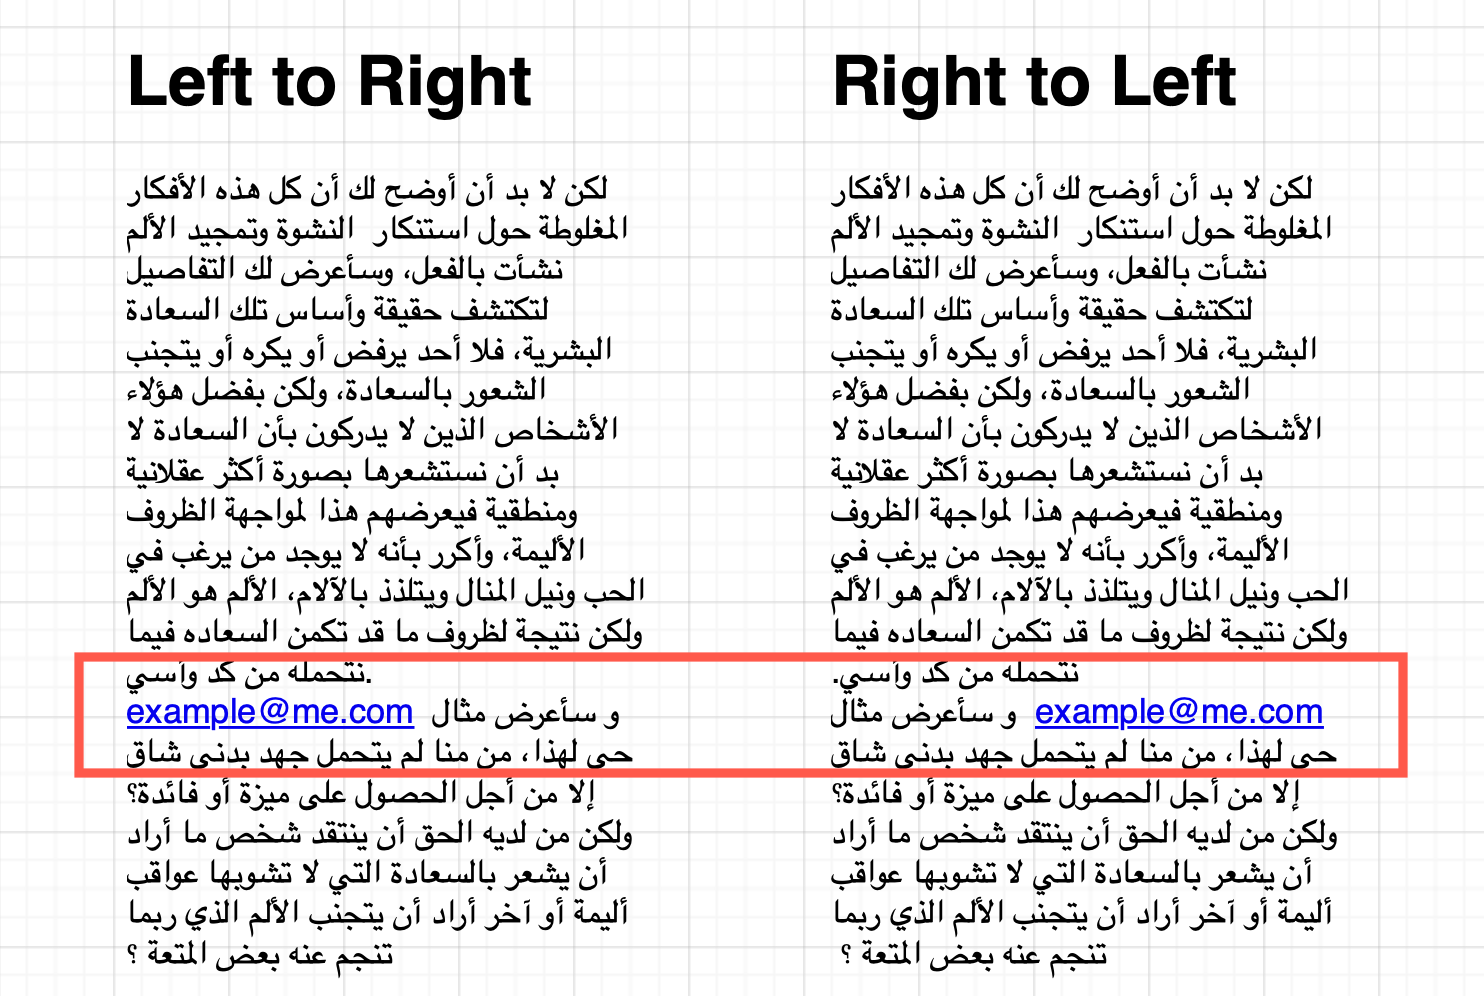 The change in alignment using right to left as the writing direction is more obvious with mixed scripts, such as English and Arabic